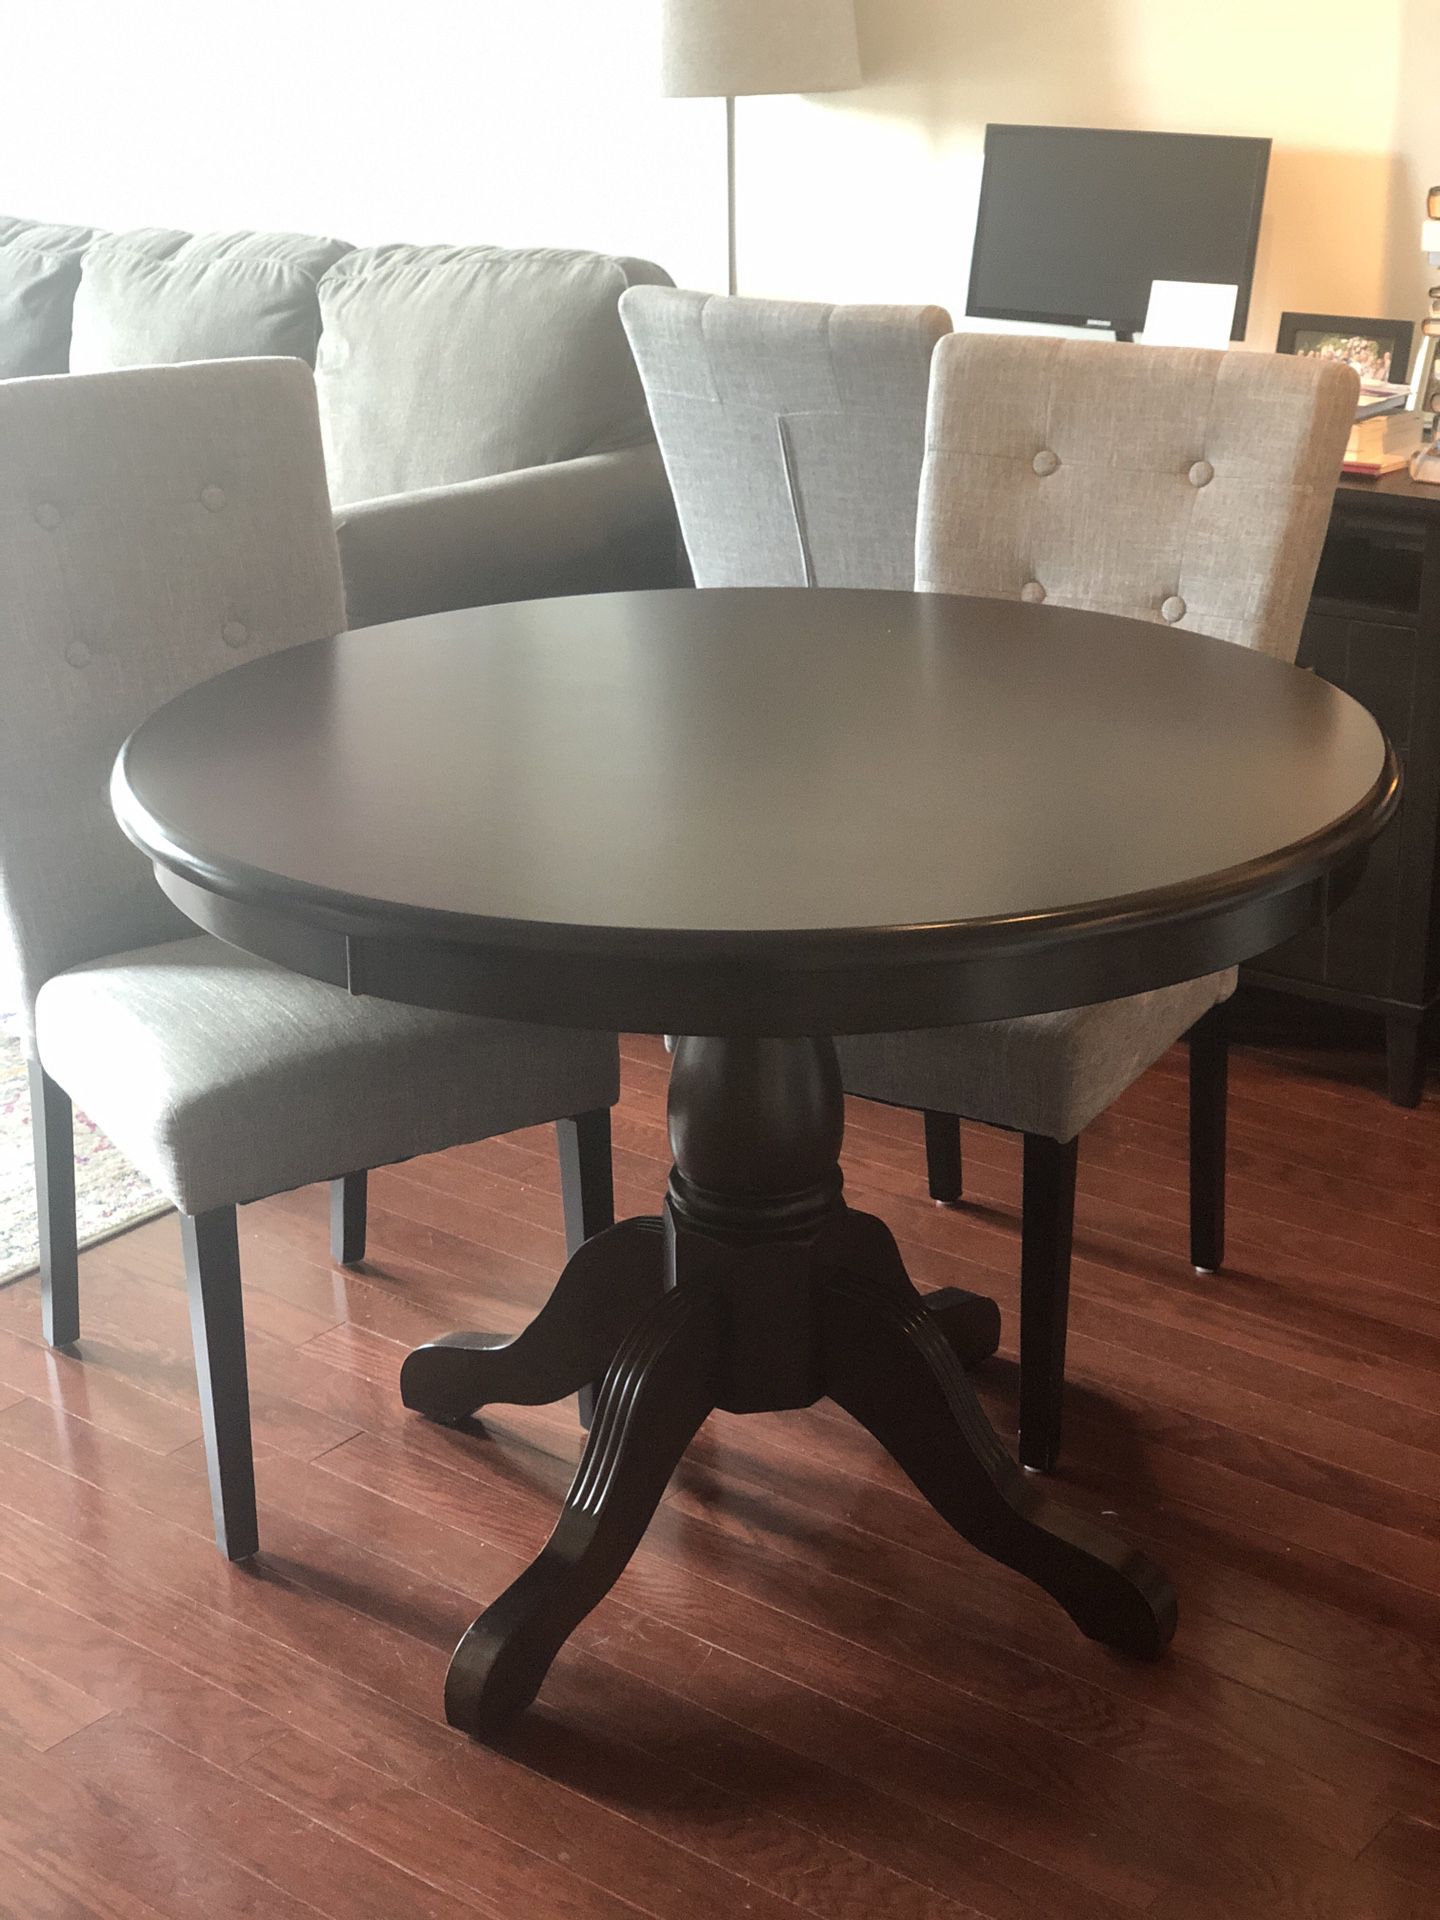 Gorgeous Wood Dining Table (Espresso)